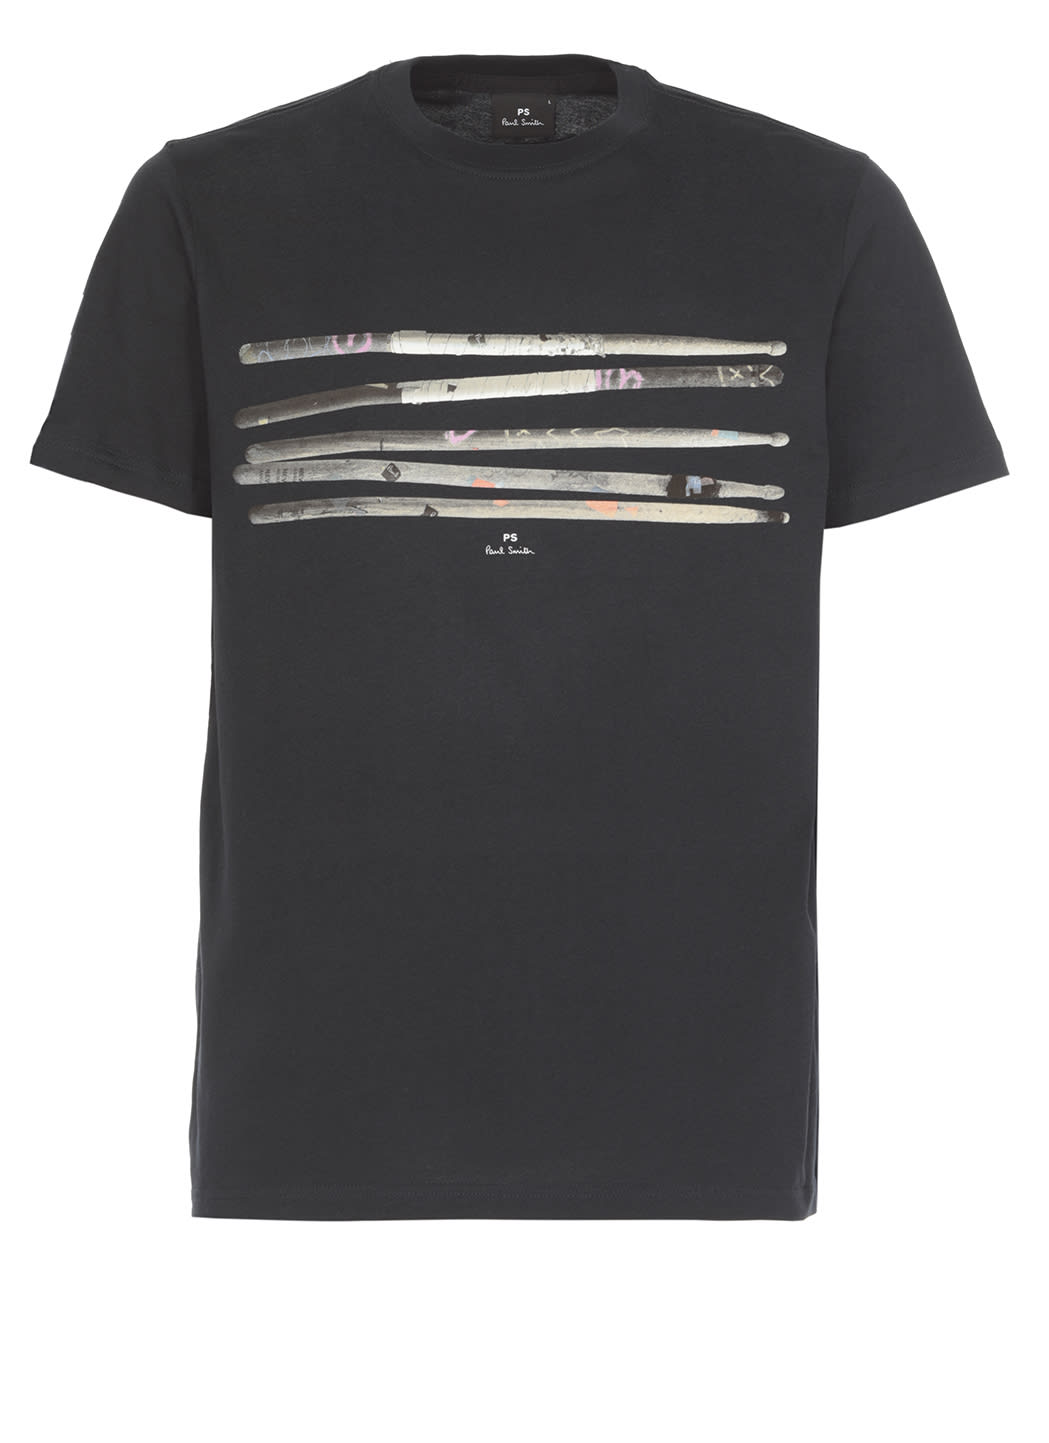 Paul Smith T-shirt With Drumsticks Print